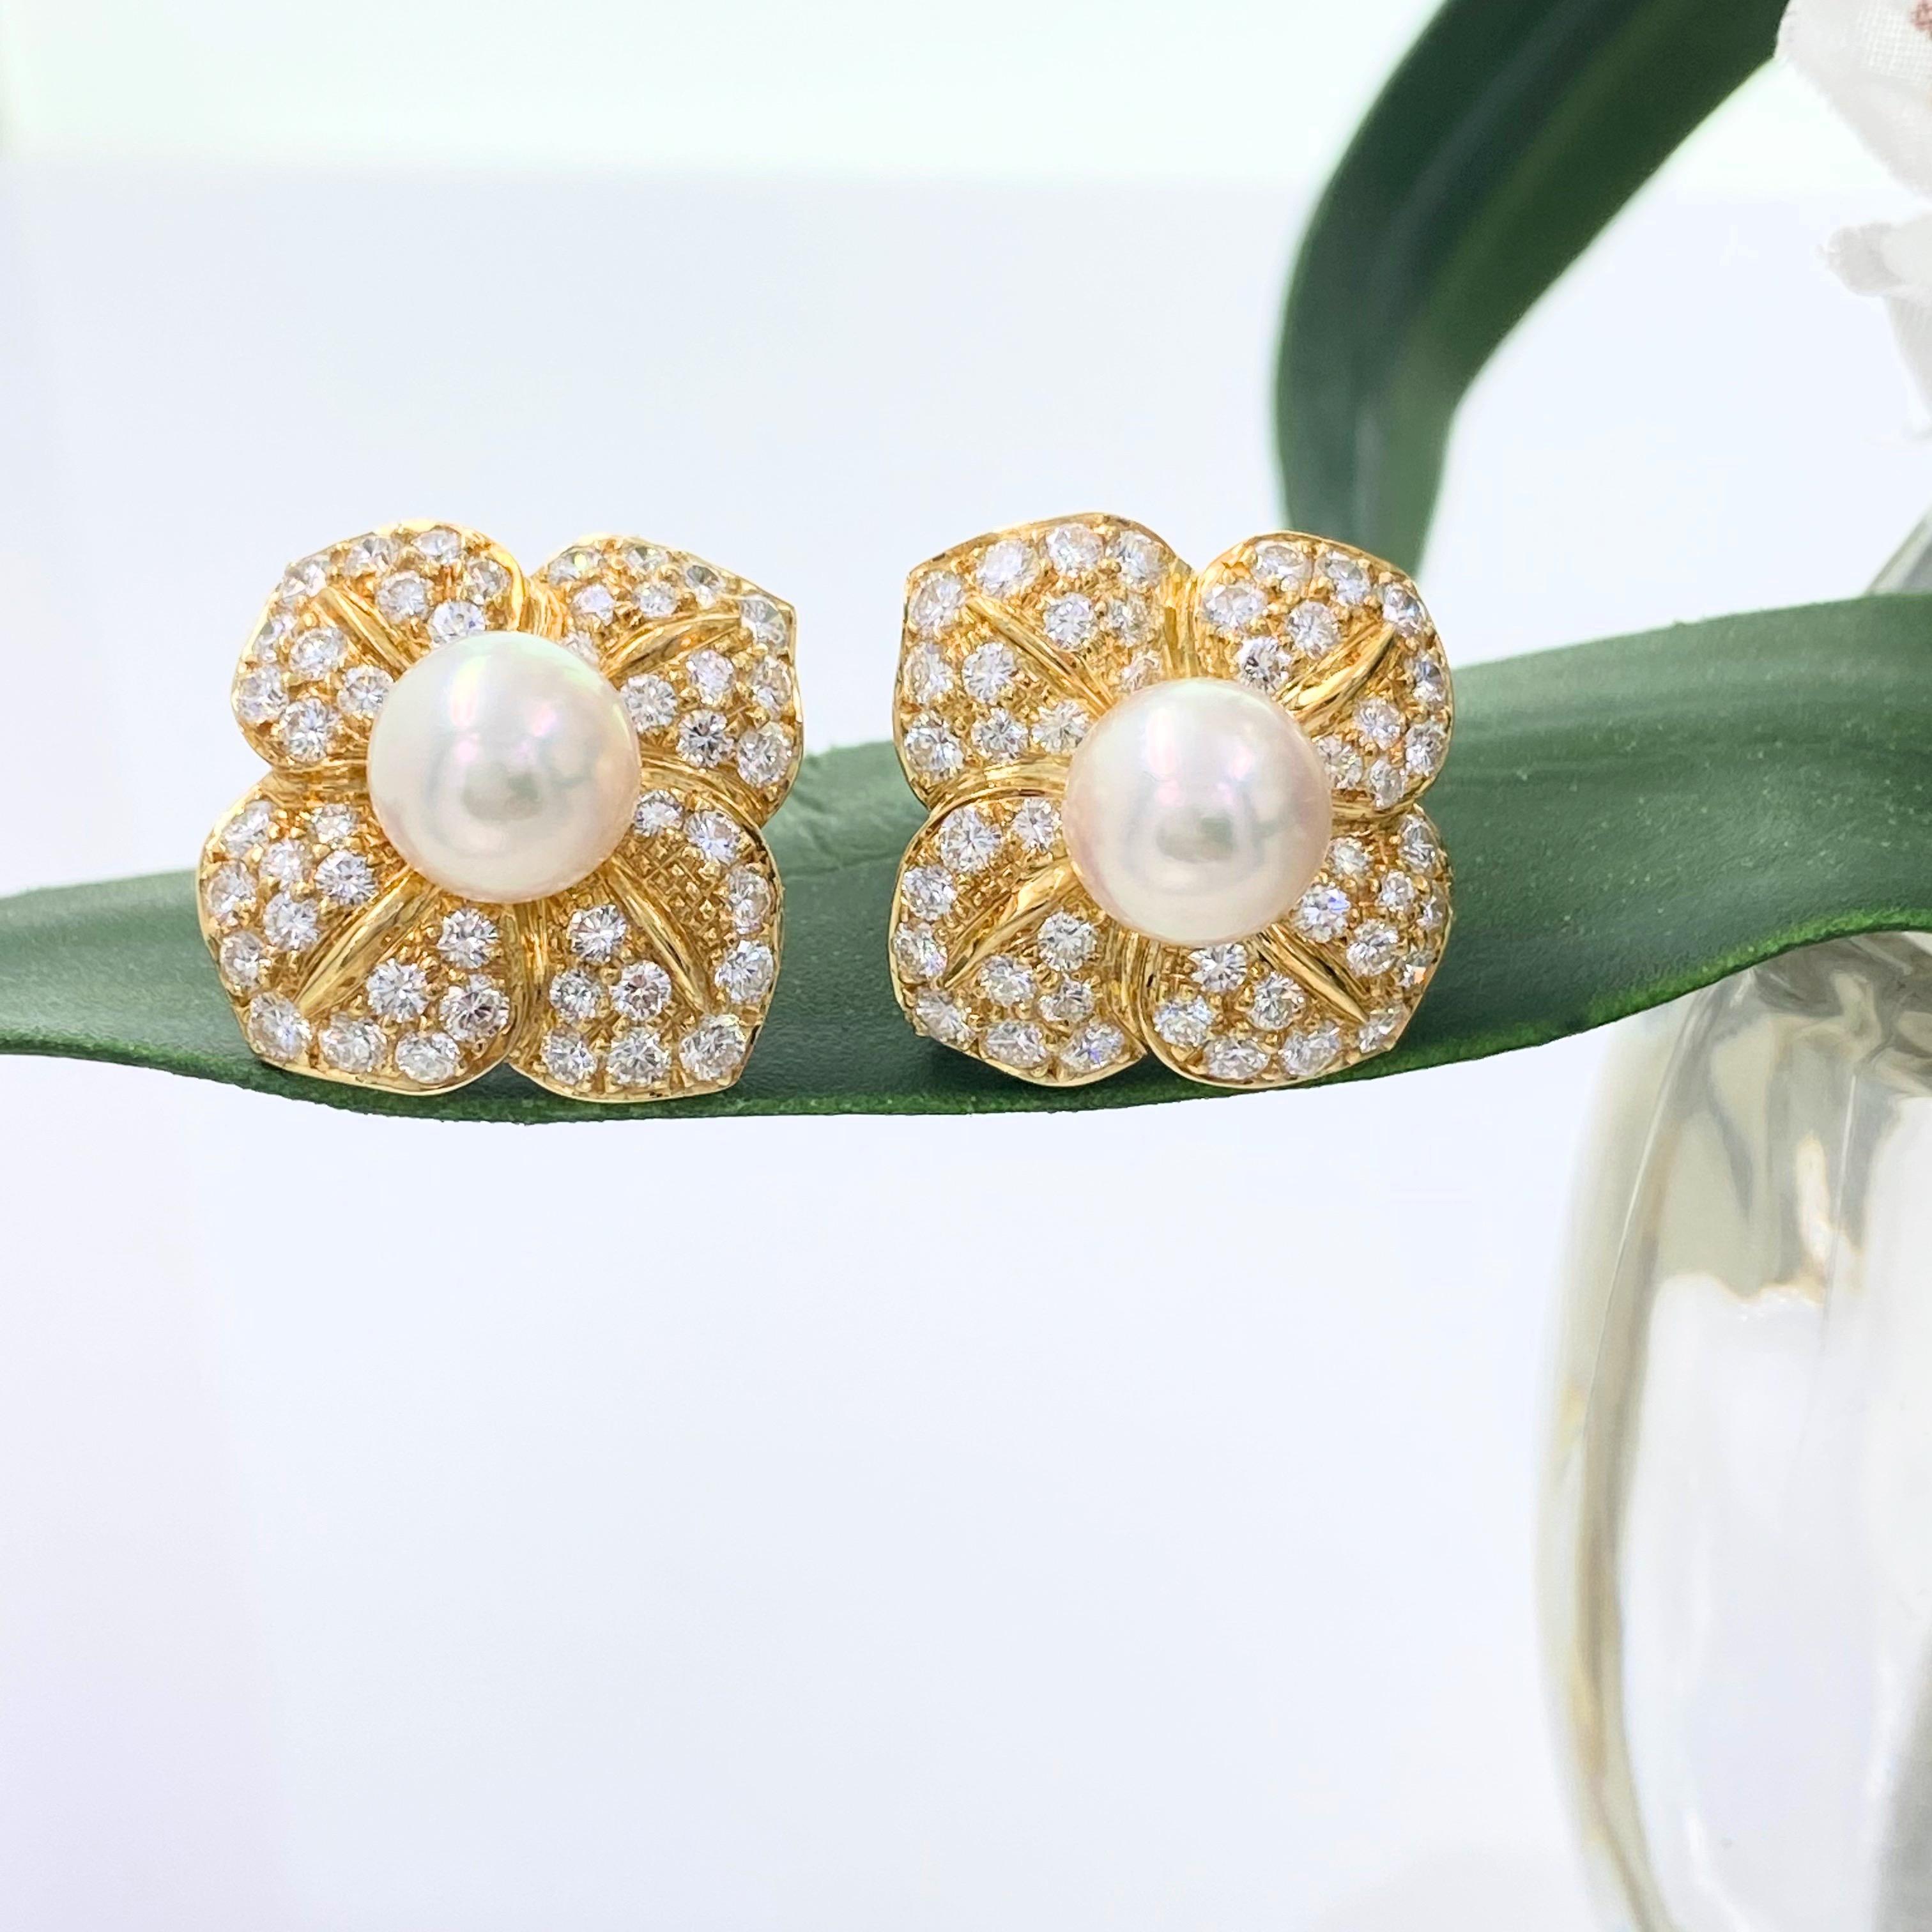 Mikimoto Pavé Diamond Pearl Floral Earrings in 18 Karat Yellow Gold For Sale 2